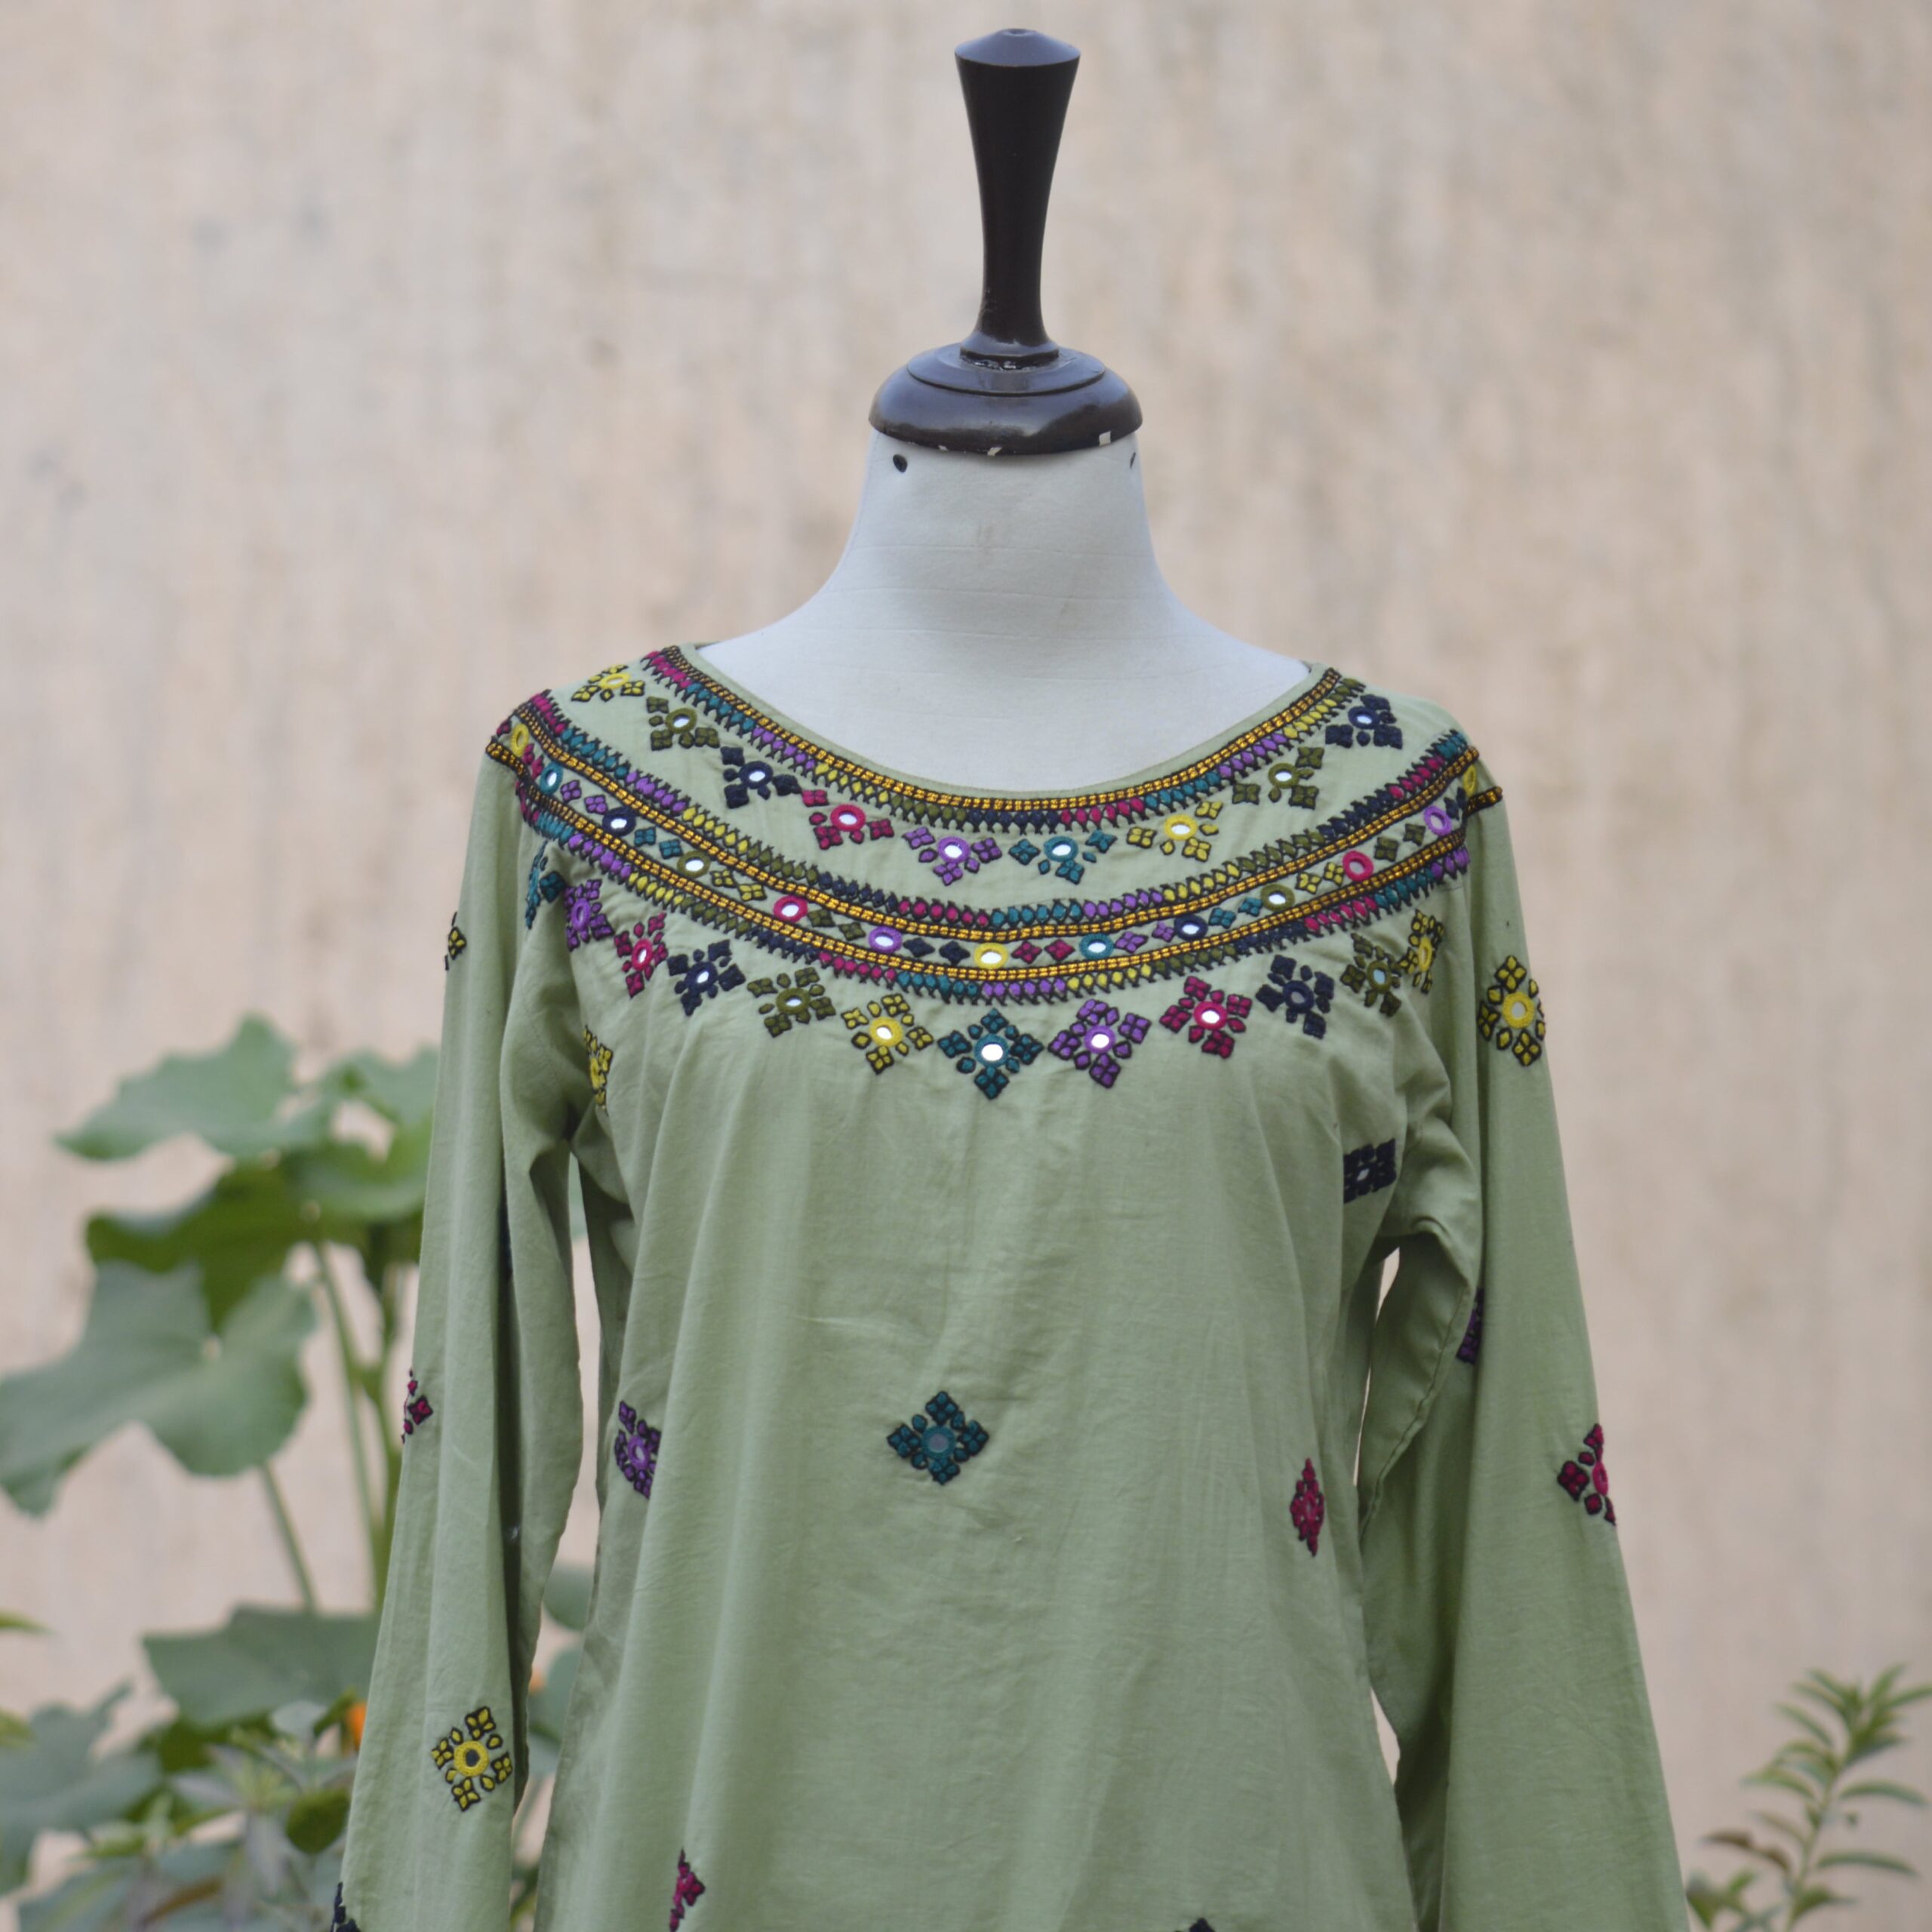 Multi Colored Sindhi Hand Embroidery Parrot Green 2-piece Suit.

Traditional Hand Embroidered
Fabric Soft Cotton
Size Medium

Order online now ( website link given in Bio).

#culturalelegancebeauty , #indusheritage #sindhiembroidery, #traditionalembroidery #fashion #handmade #easternfashion #wearingtoday